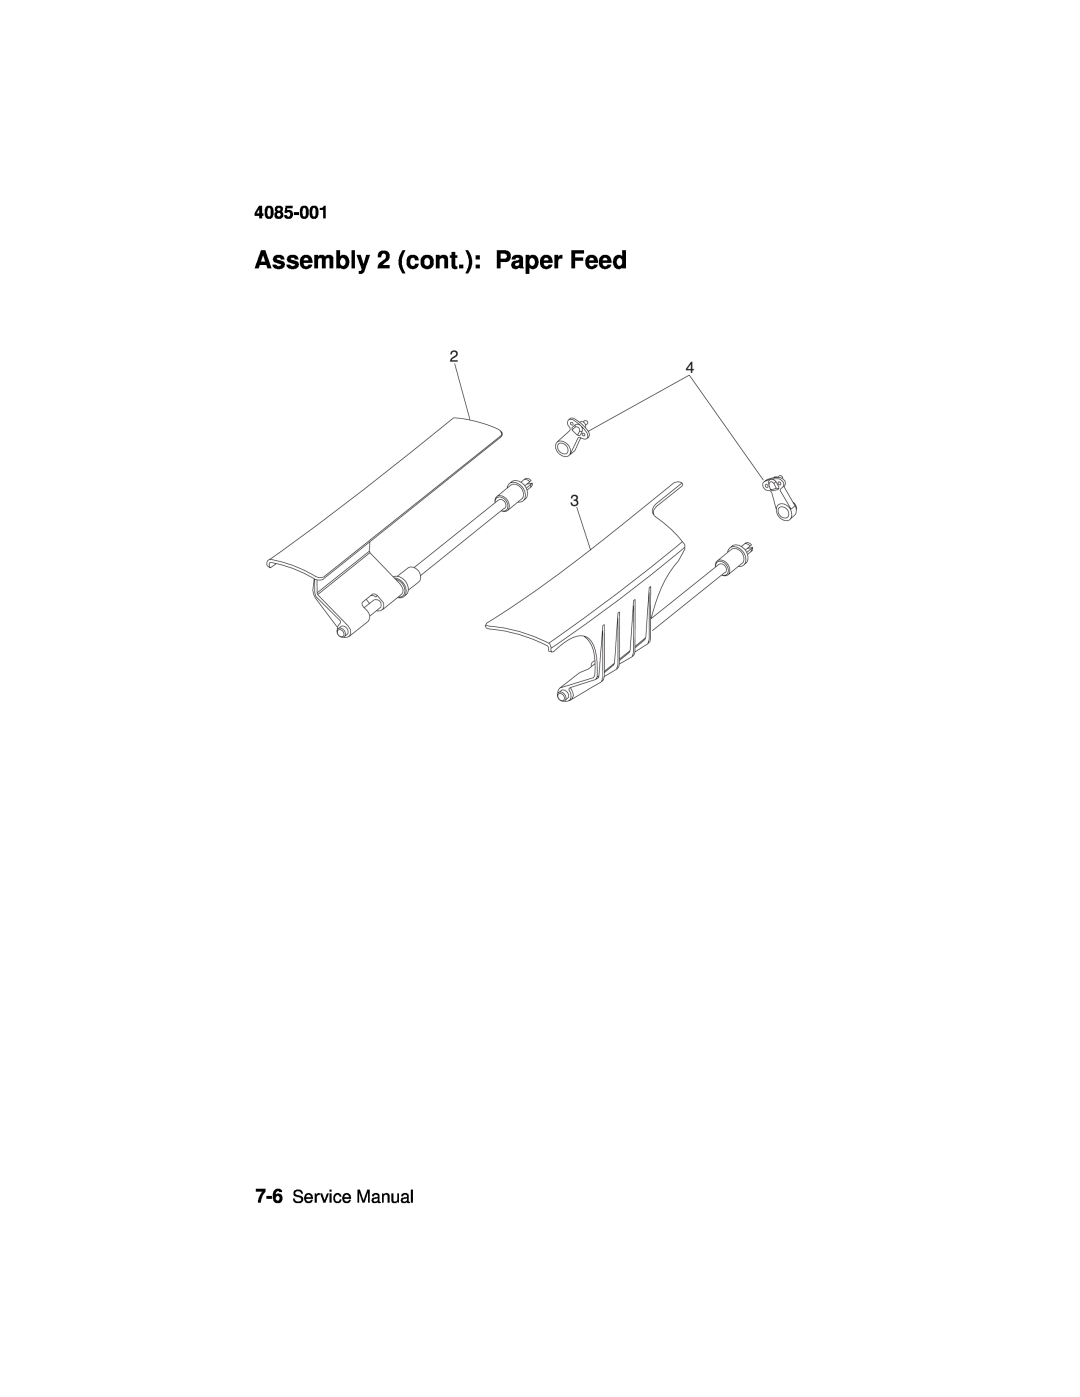 Lexmark J110, Printer manual Assembly 2 cont.: Paper Feed, 4085-001, Service Manual 